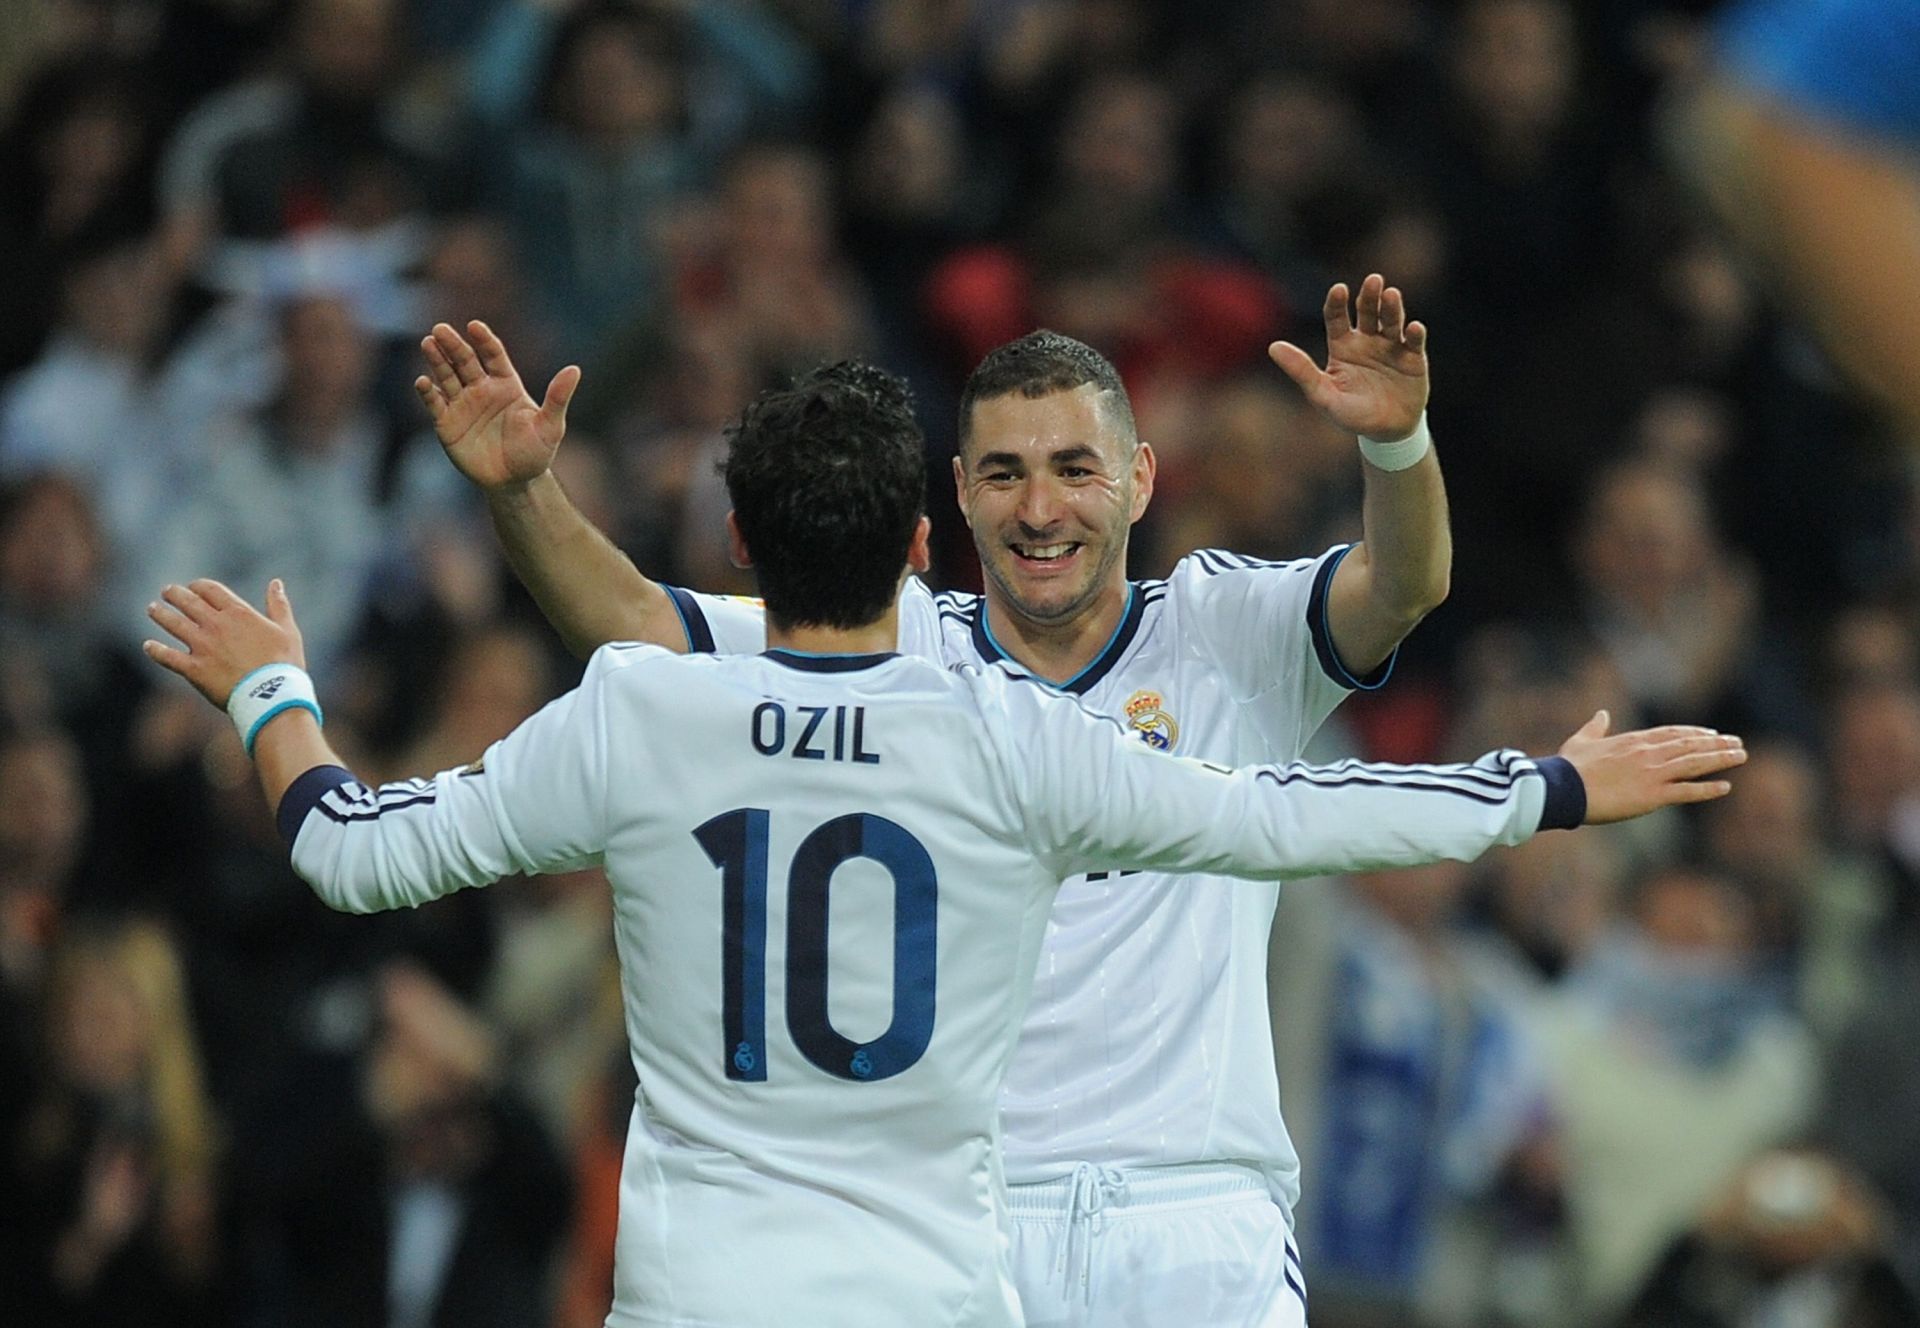 Mesut Ozil and Karim Benzema in action for Real Madrid